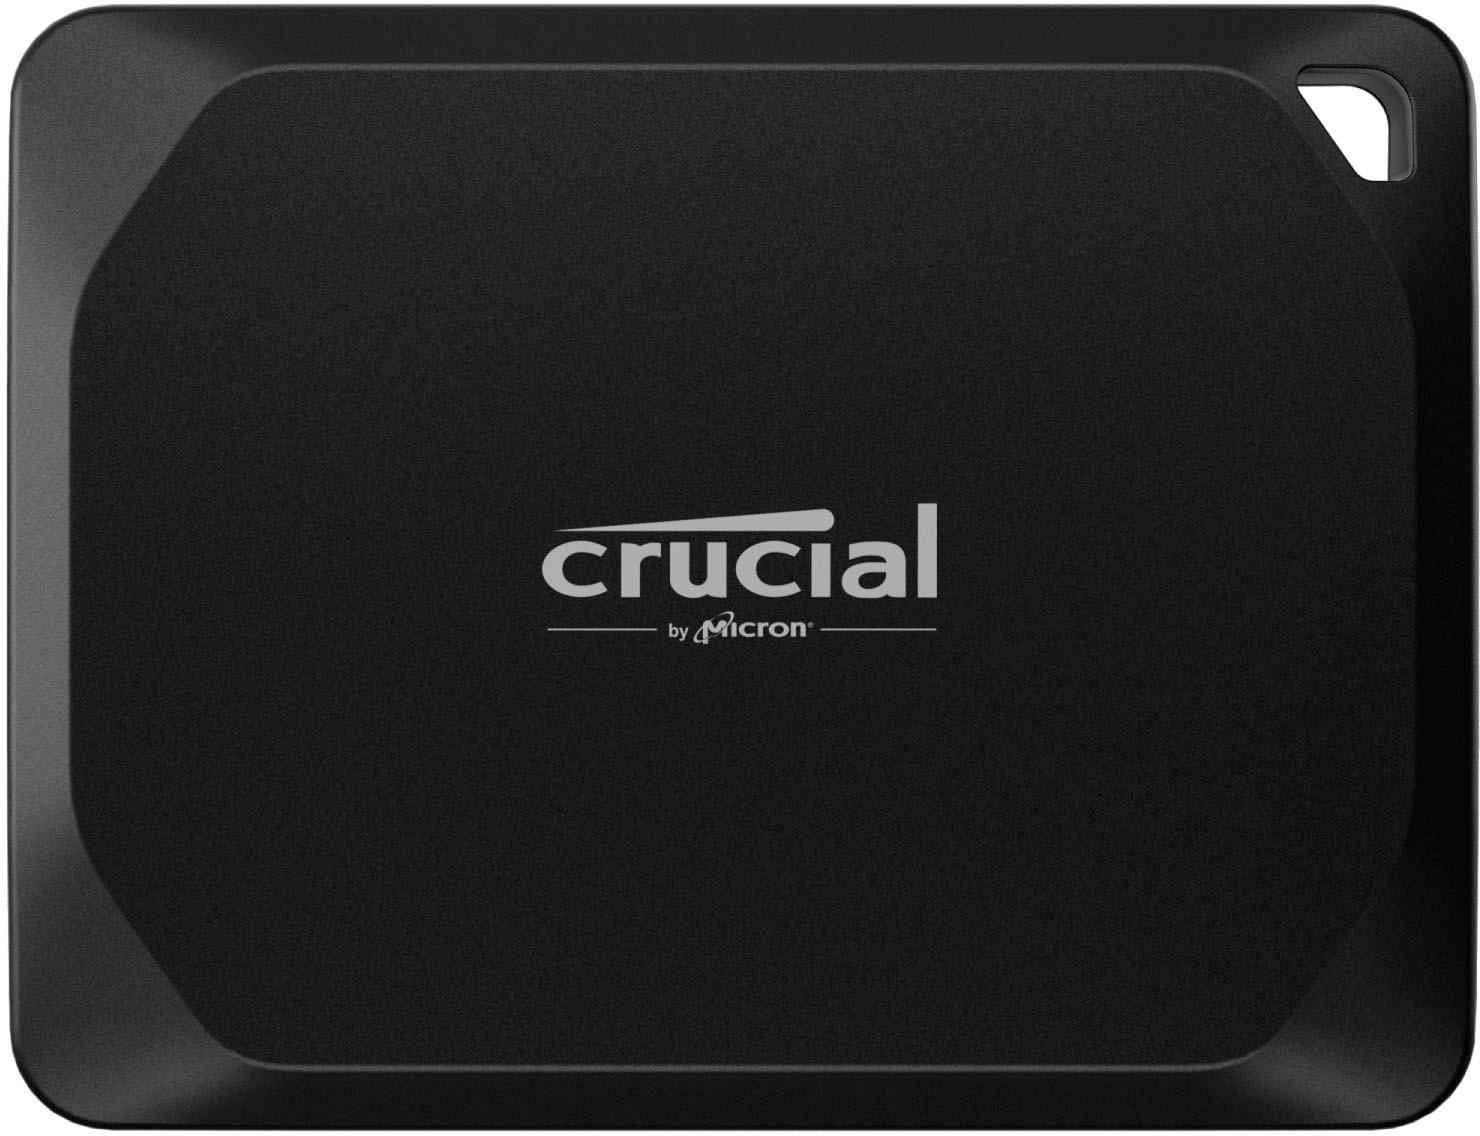 Crucial X6 4TB Portable SSD Review - Page 6 of 6 - Legit Reviews